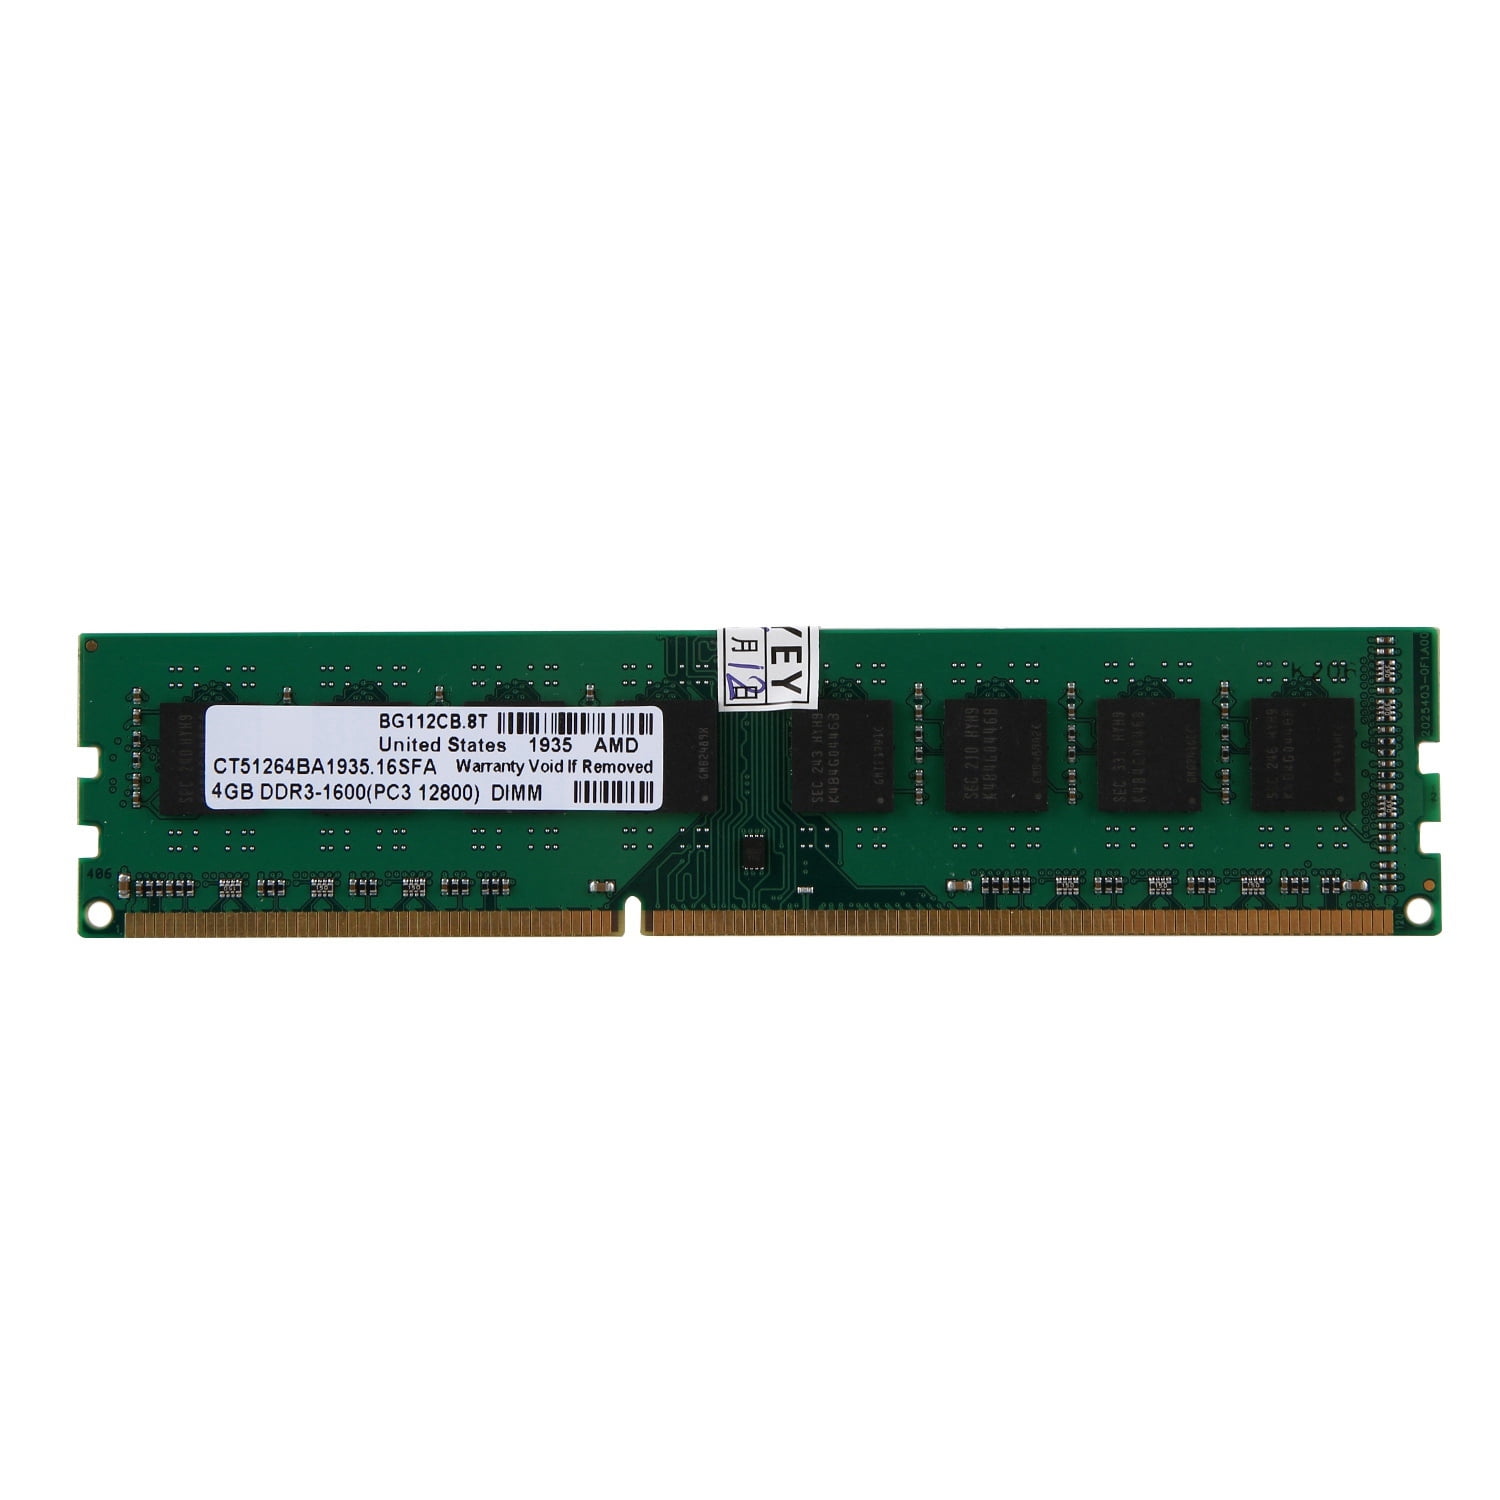 Memory Ram PC3-12800 1600MHz 1.5V 240Pins Memory DIMM for AMD Motherboard(4GB) -